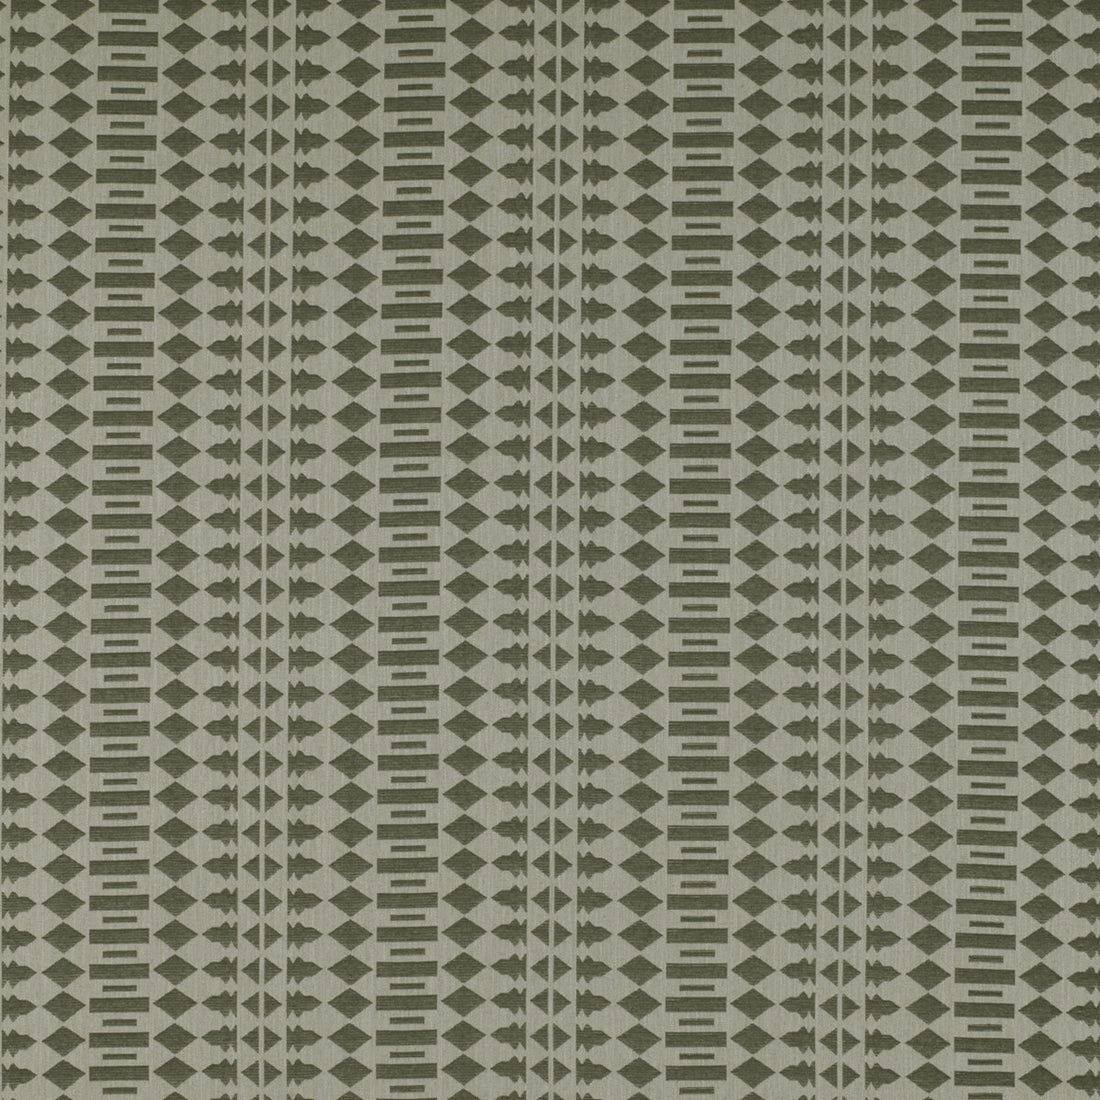 Pavia fabric in gris color - pattern GDT5322.002.0 - by Gaston y Daniela in the Tierras collection